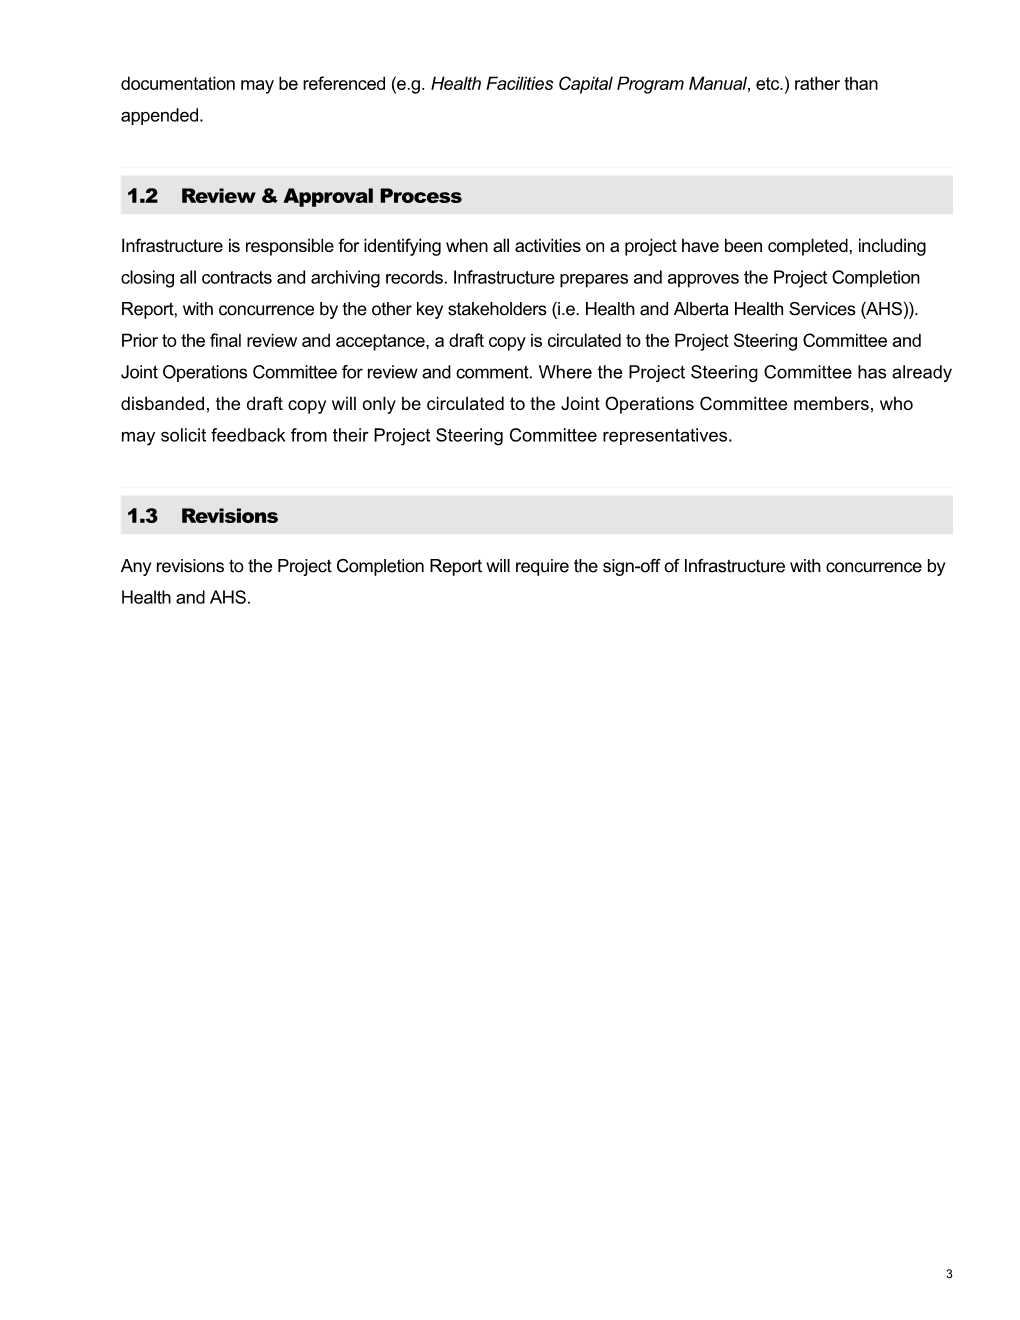 Business Case Template s1